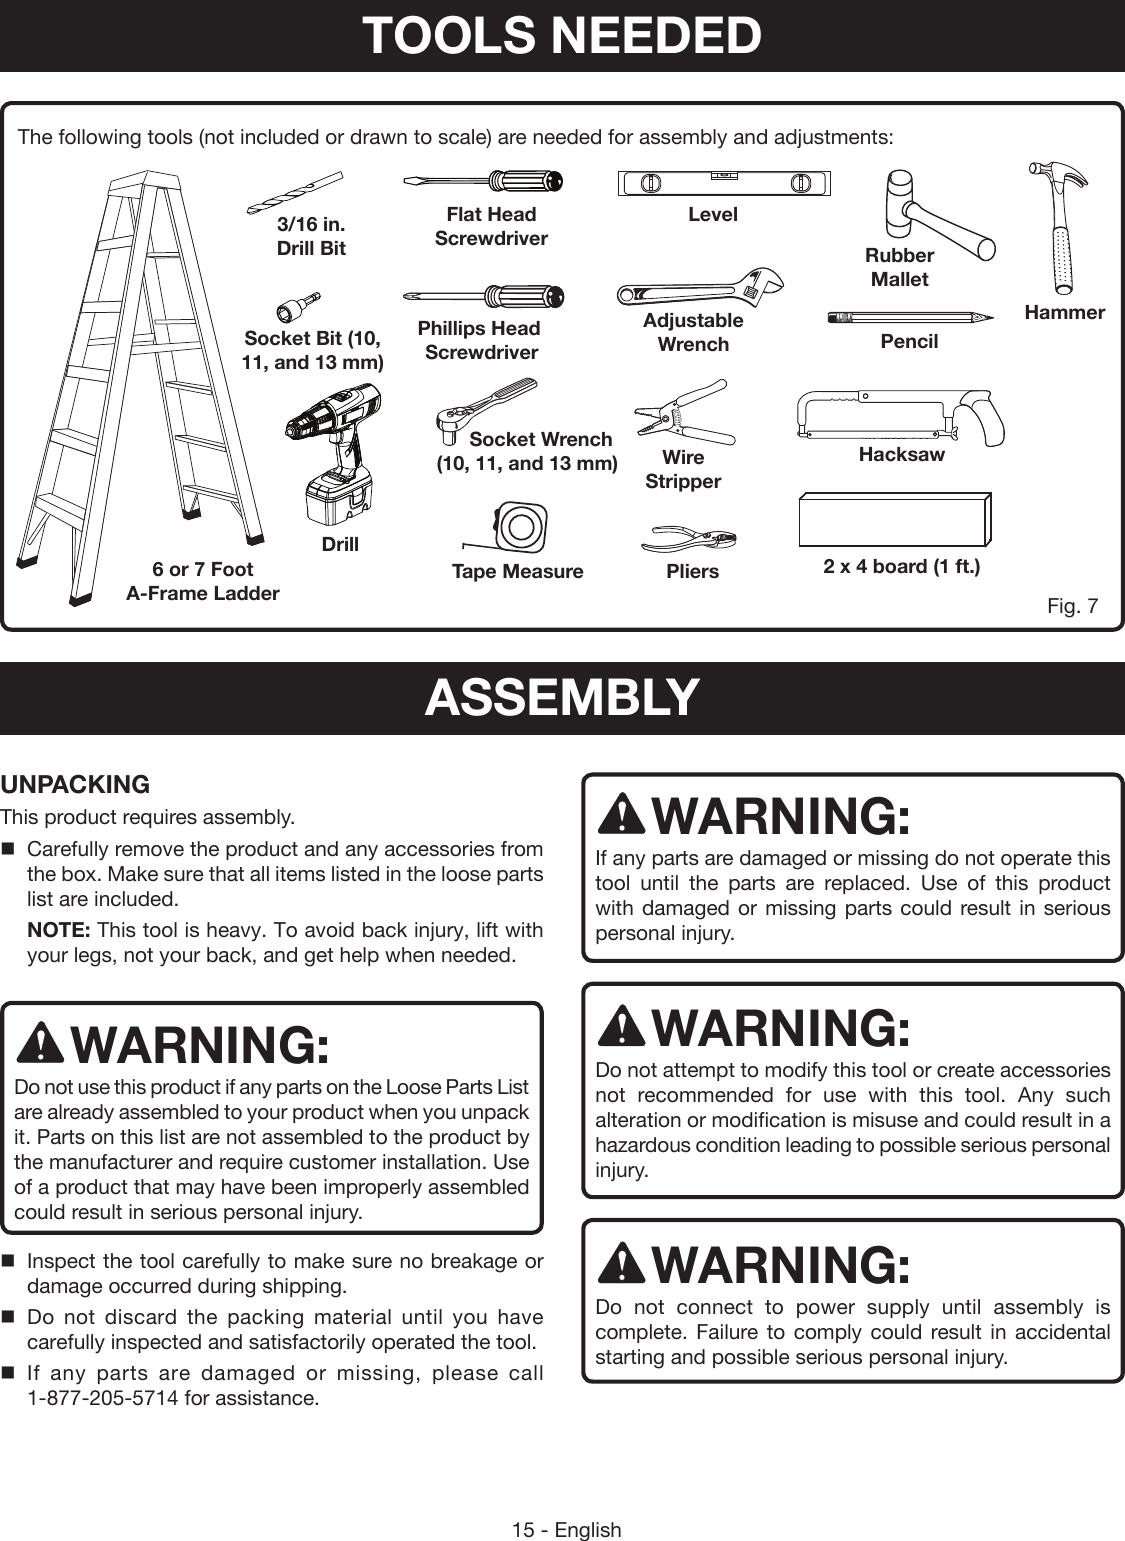 15 - EnglishThe following tools (not included or drawn to scale) are needed for assembly and adjustments:UNPACKINGThis product requires assembly. Carefully remove the product and any accessories from the box. Make sure that all items listed in the loose parts list are included.NOTE: This tool is heavy. To avoid back injury, lift with your legs, not your back, and get help when needed.WARNING:Do not use this product if any parts on the Loose Parts List are already assembled to your product when you unpack it. Parts on this list are not assembled to the product by the manufacturer and require customer installation. Use of a product that may have been improperly assembled could result in serious personal injury. Inspect the tool carefully to make sure no breakage or damage occurred during shipping. Do not discard the packing material until you have carefully inspected and satisfactorily operated the tool. If any parts are damaged or missing, please call 1-877-205-5714 for assistance.WARNING:If any parts are damaged or missing do not operate this tool until the parts are replaced. Use of this product with damaged or missing parts could result in serious personal injury.WARNING:Do not attempt to modify this tool or create accessories not recommended for use with this tool. Any such alteration or modification is misuse and could result in a hazardous condition leading to possible serious personal injury.WARNING:Do not connect to power supply until assembly is complete. Failure to comply could result in accidental starting and possible serious personal injury.Fig. 76 or 7 Foot A-Frame LadderDrillSocket Bit (10,  11, and 13 mm)3/16 in. Drill BitPliersTape MeasureFlat Head  ScrewdriverPhillips Head  ScrewdriverAdjustable WrenchLevelPencilHammerHacksaw2 x 4 board (1 ft.)Rubber Mallet        Socket Wrench     (10, 11, and 13 mm) Wire StripperTOOLS NEEDEDASSEMBLY